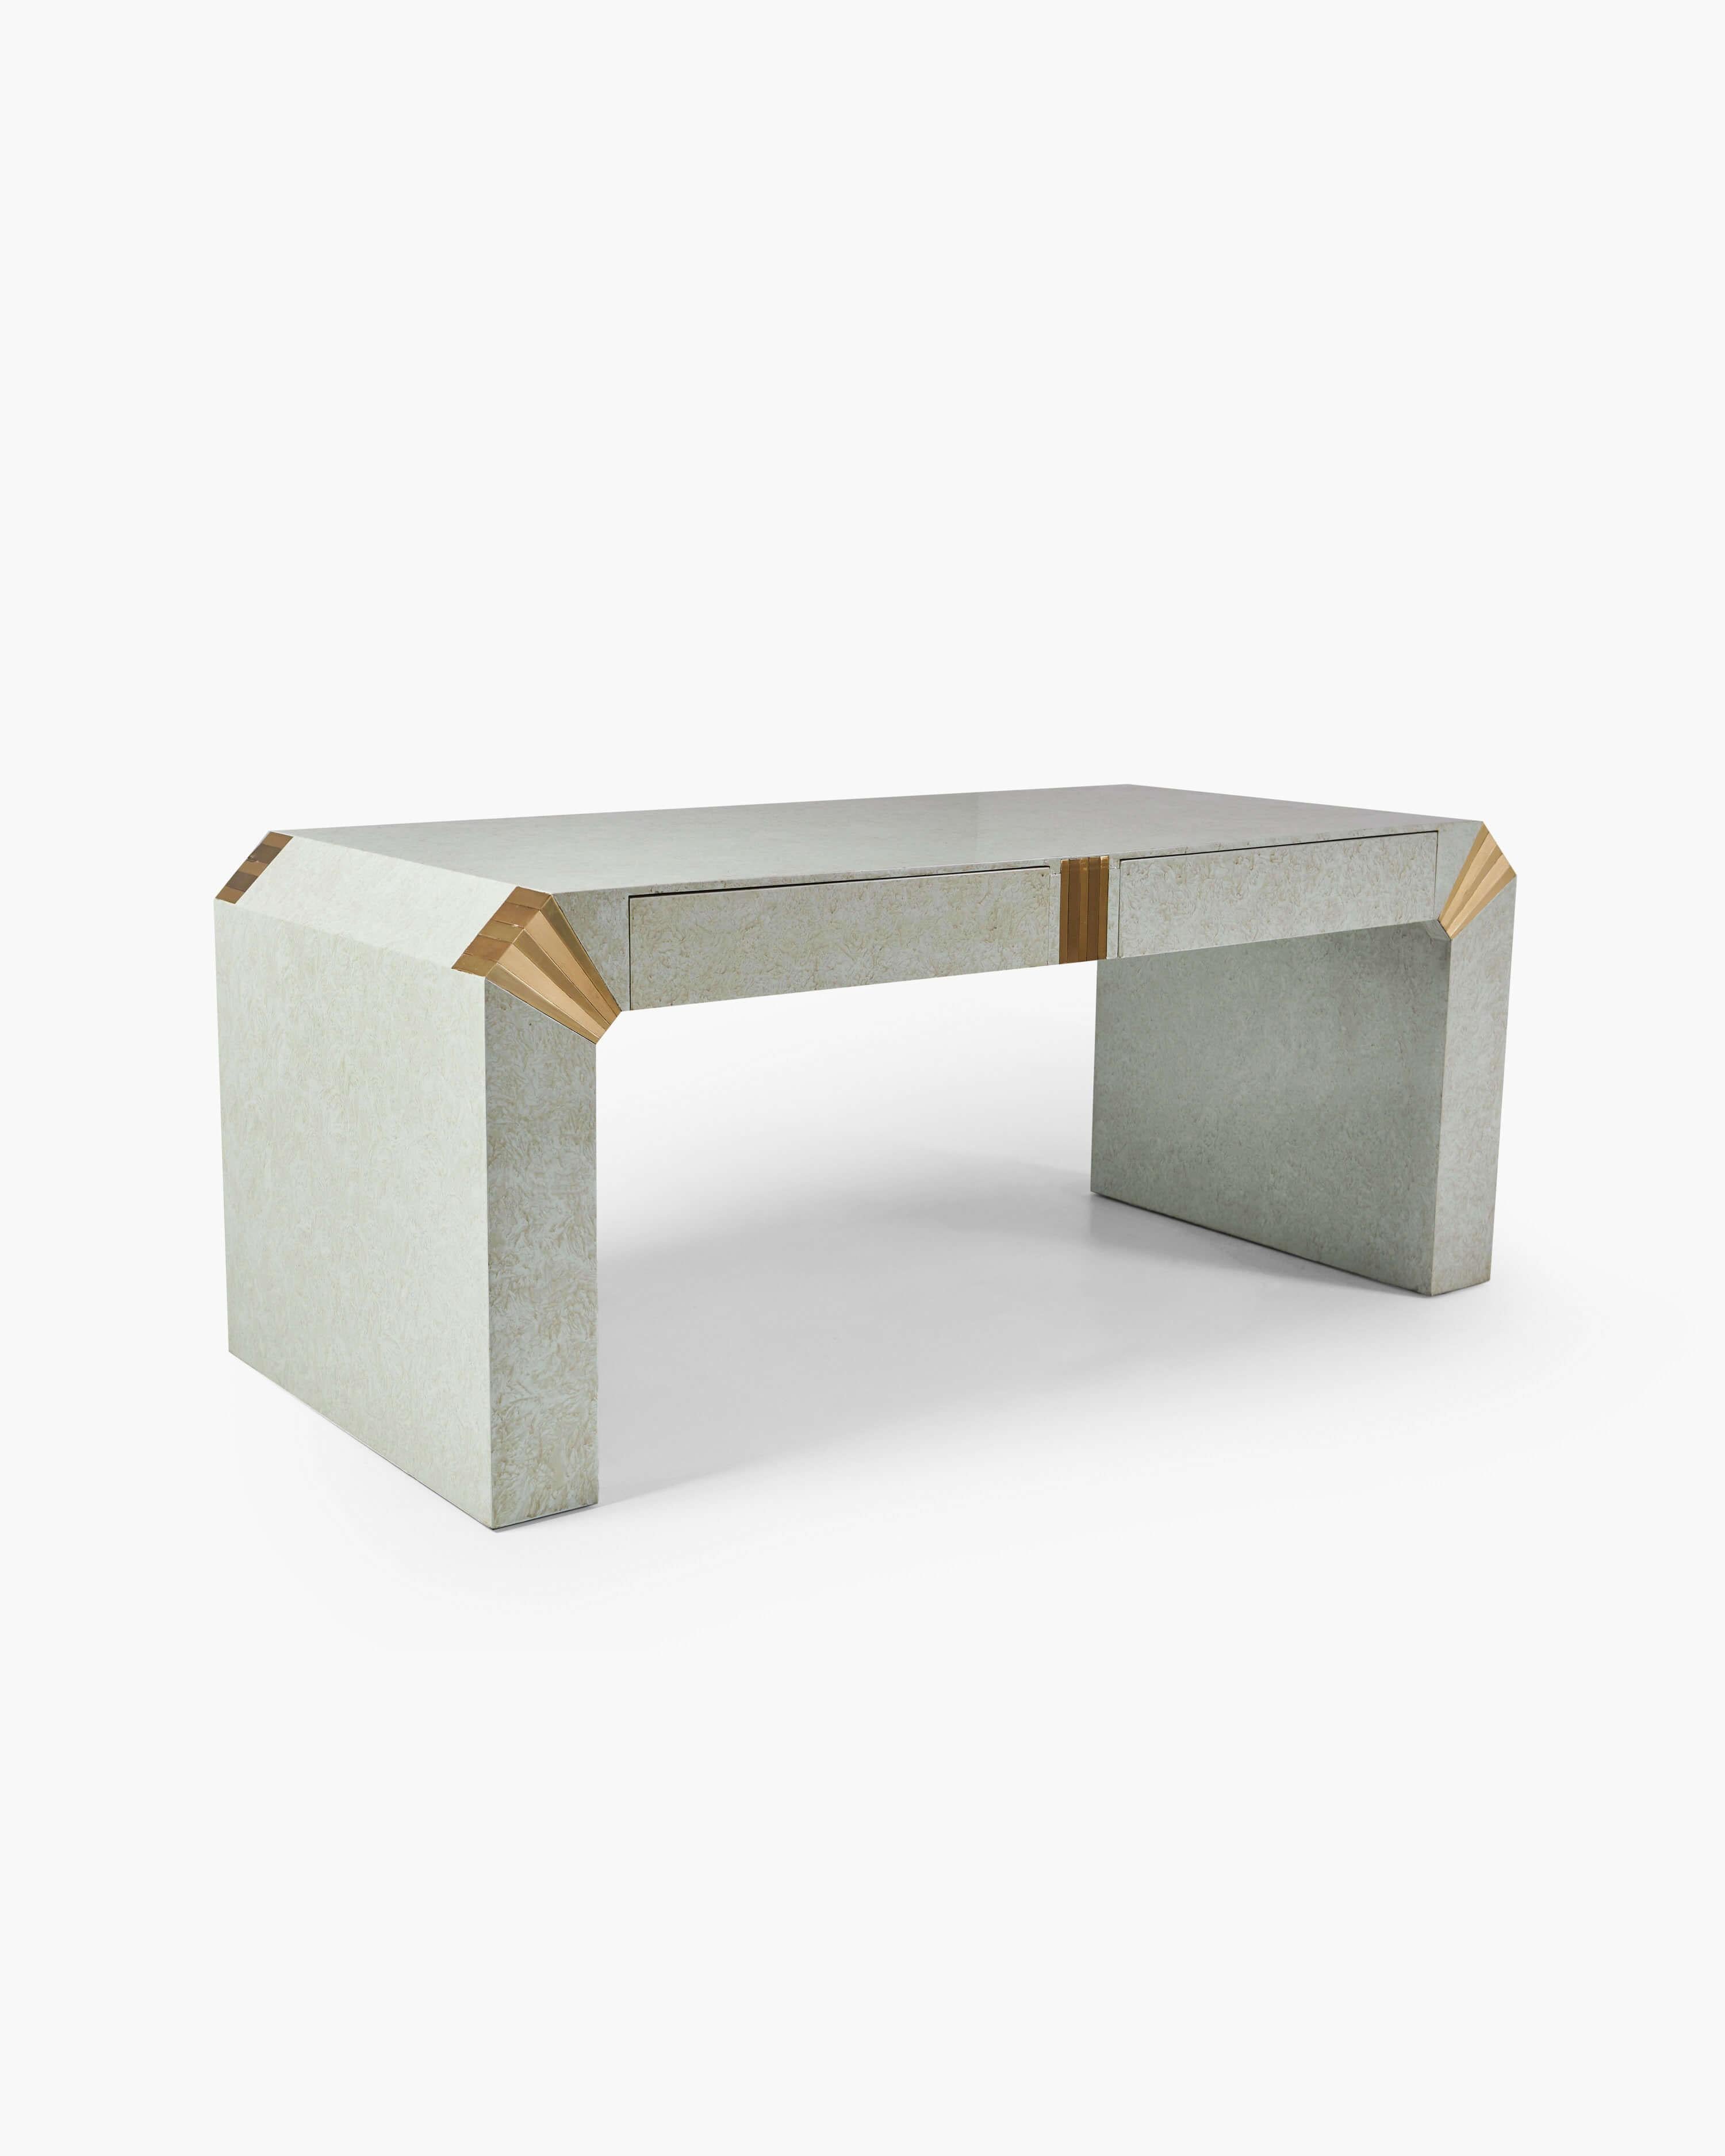 This 1970s desk achieves a modest stateliness, its mottled paper parchment & faceted brass corners showcasing superb attention to detail. The seamless integration of variant textures & finishes is in keeping with its modernist heritage, elevating